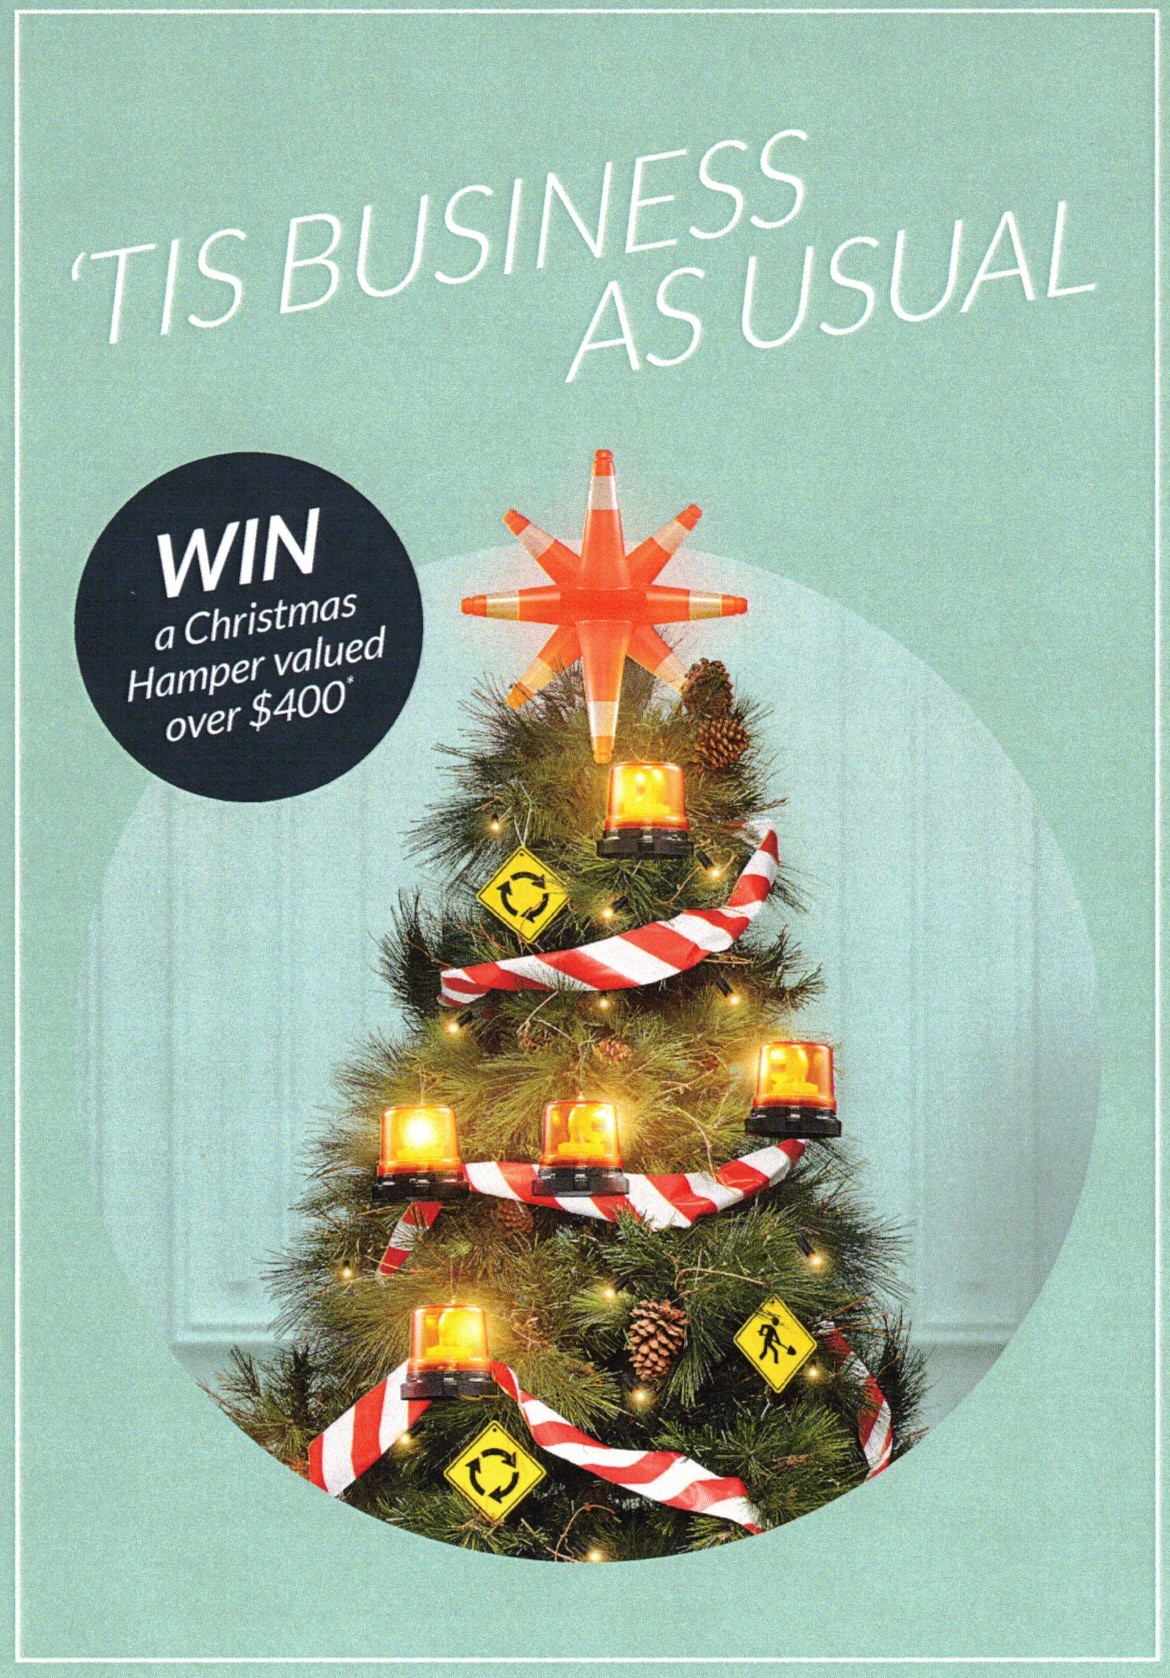 Win one of four Christmas Hampers valued over $400!